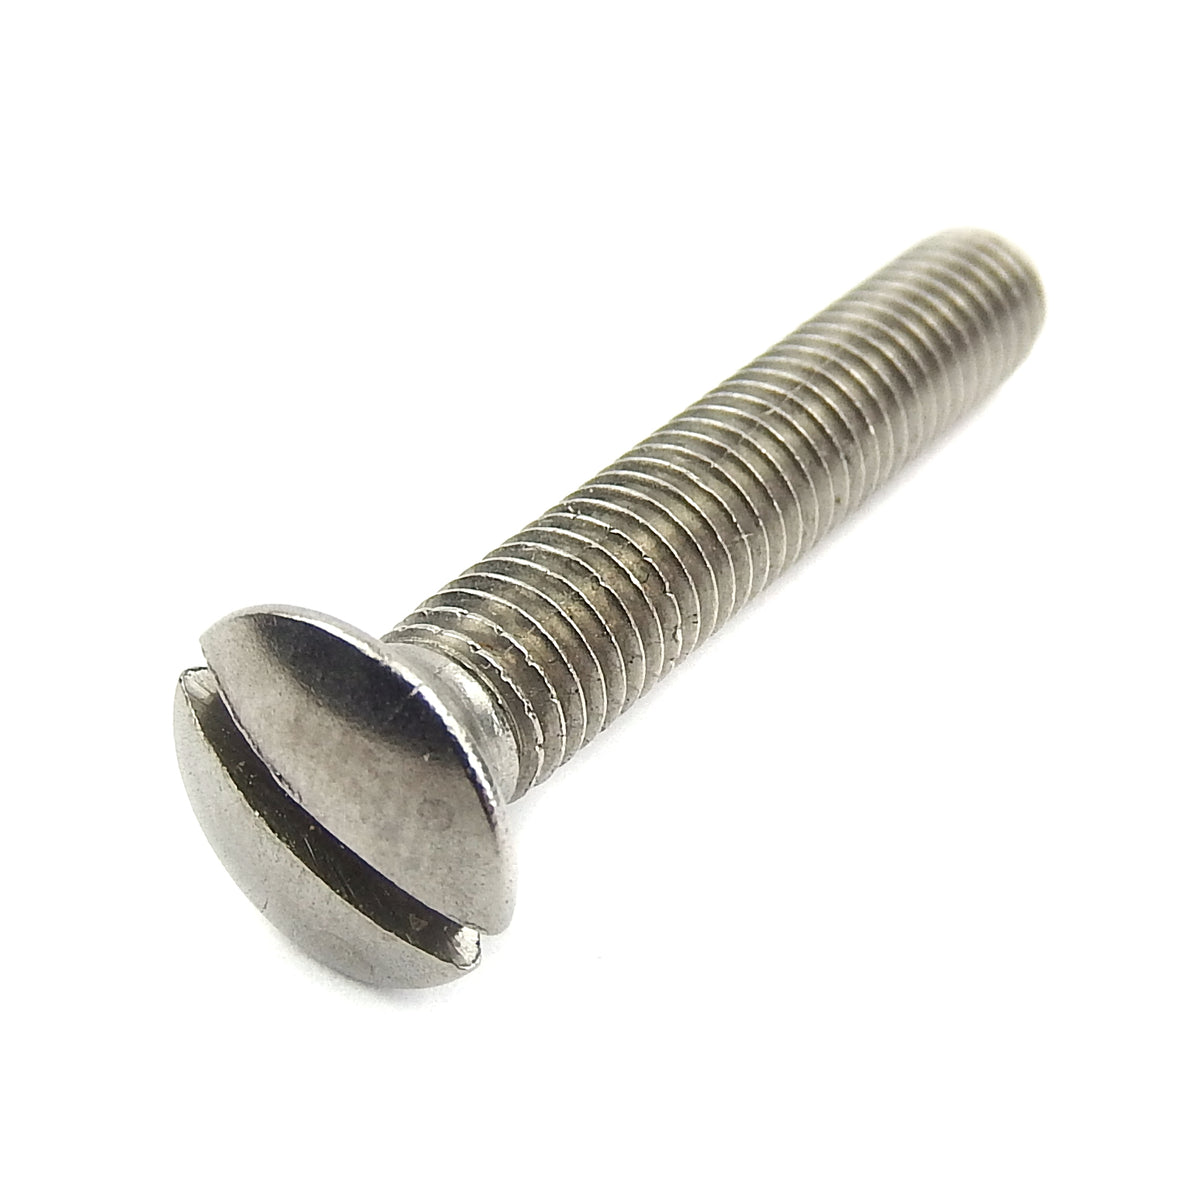 Counter Sunk Raised Screw M4 x 16mm Stainless